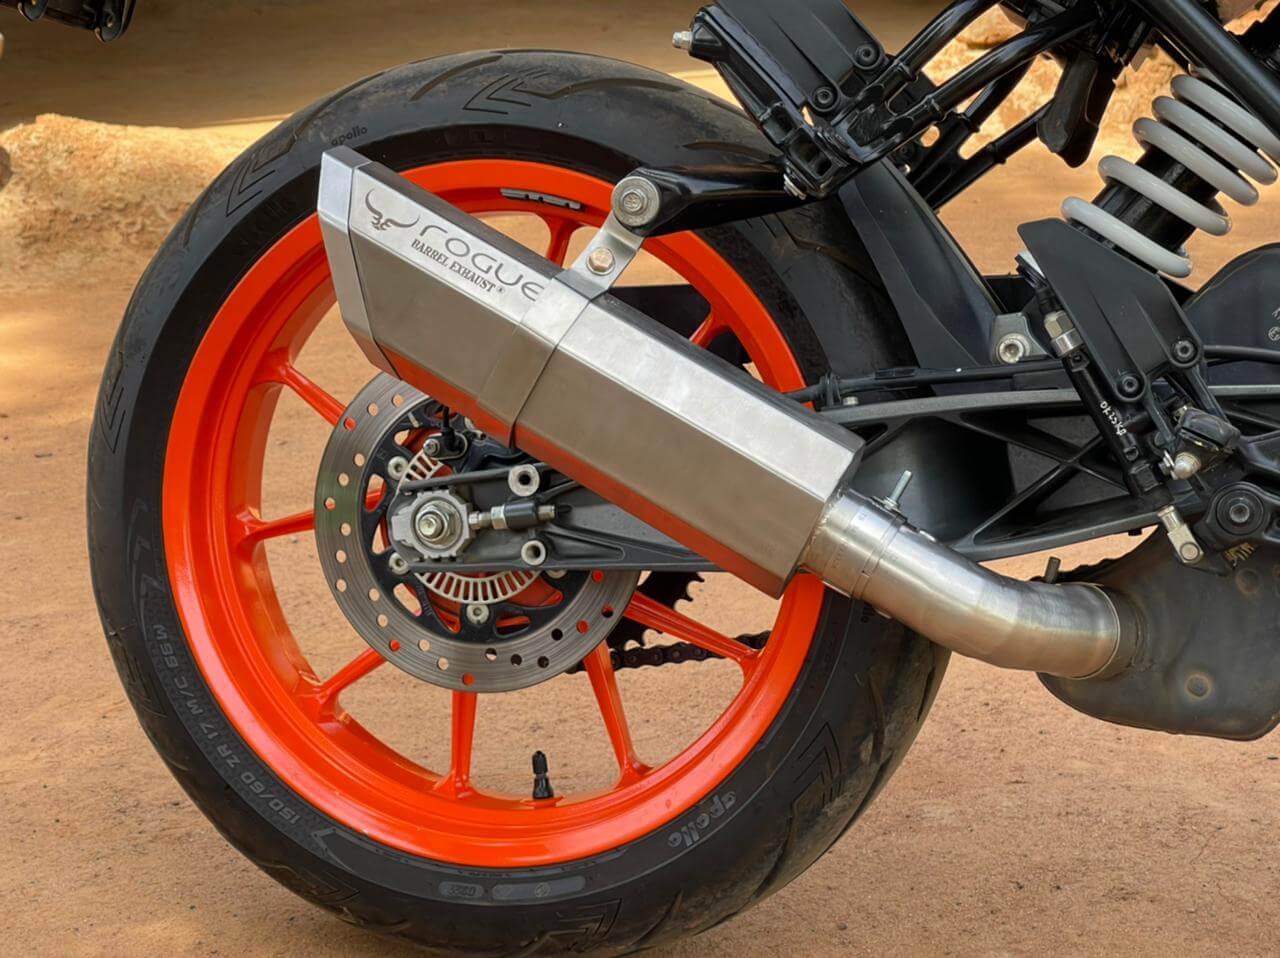 Rogue for KTM- Steel